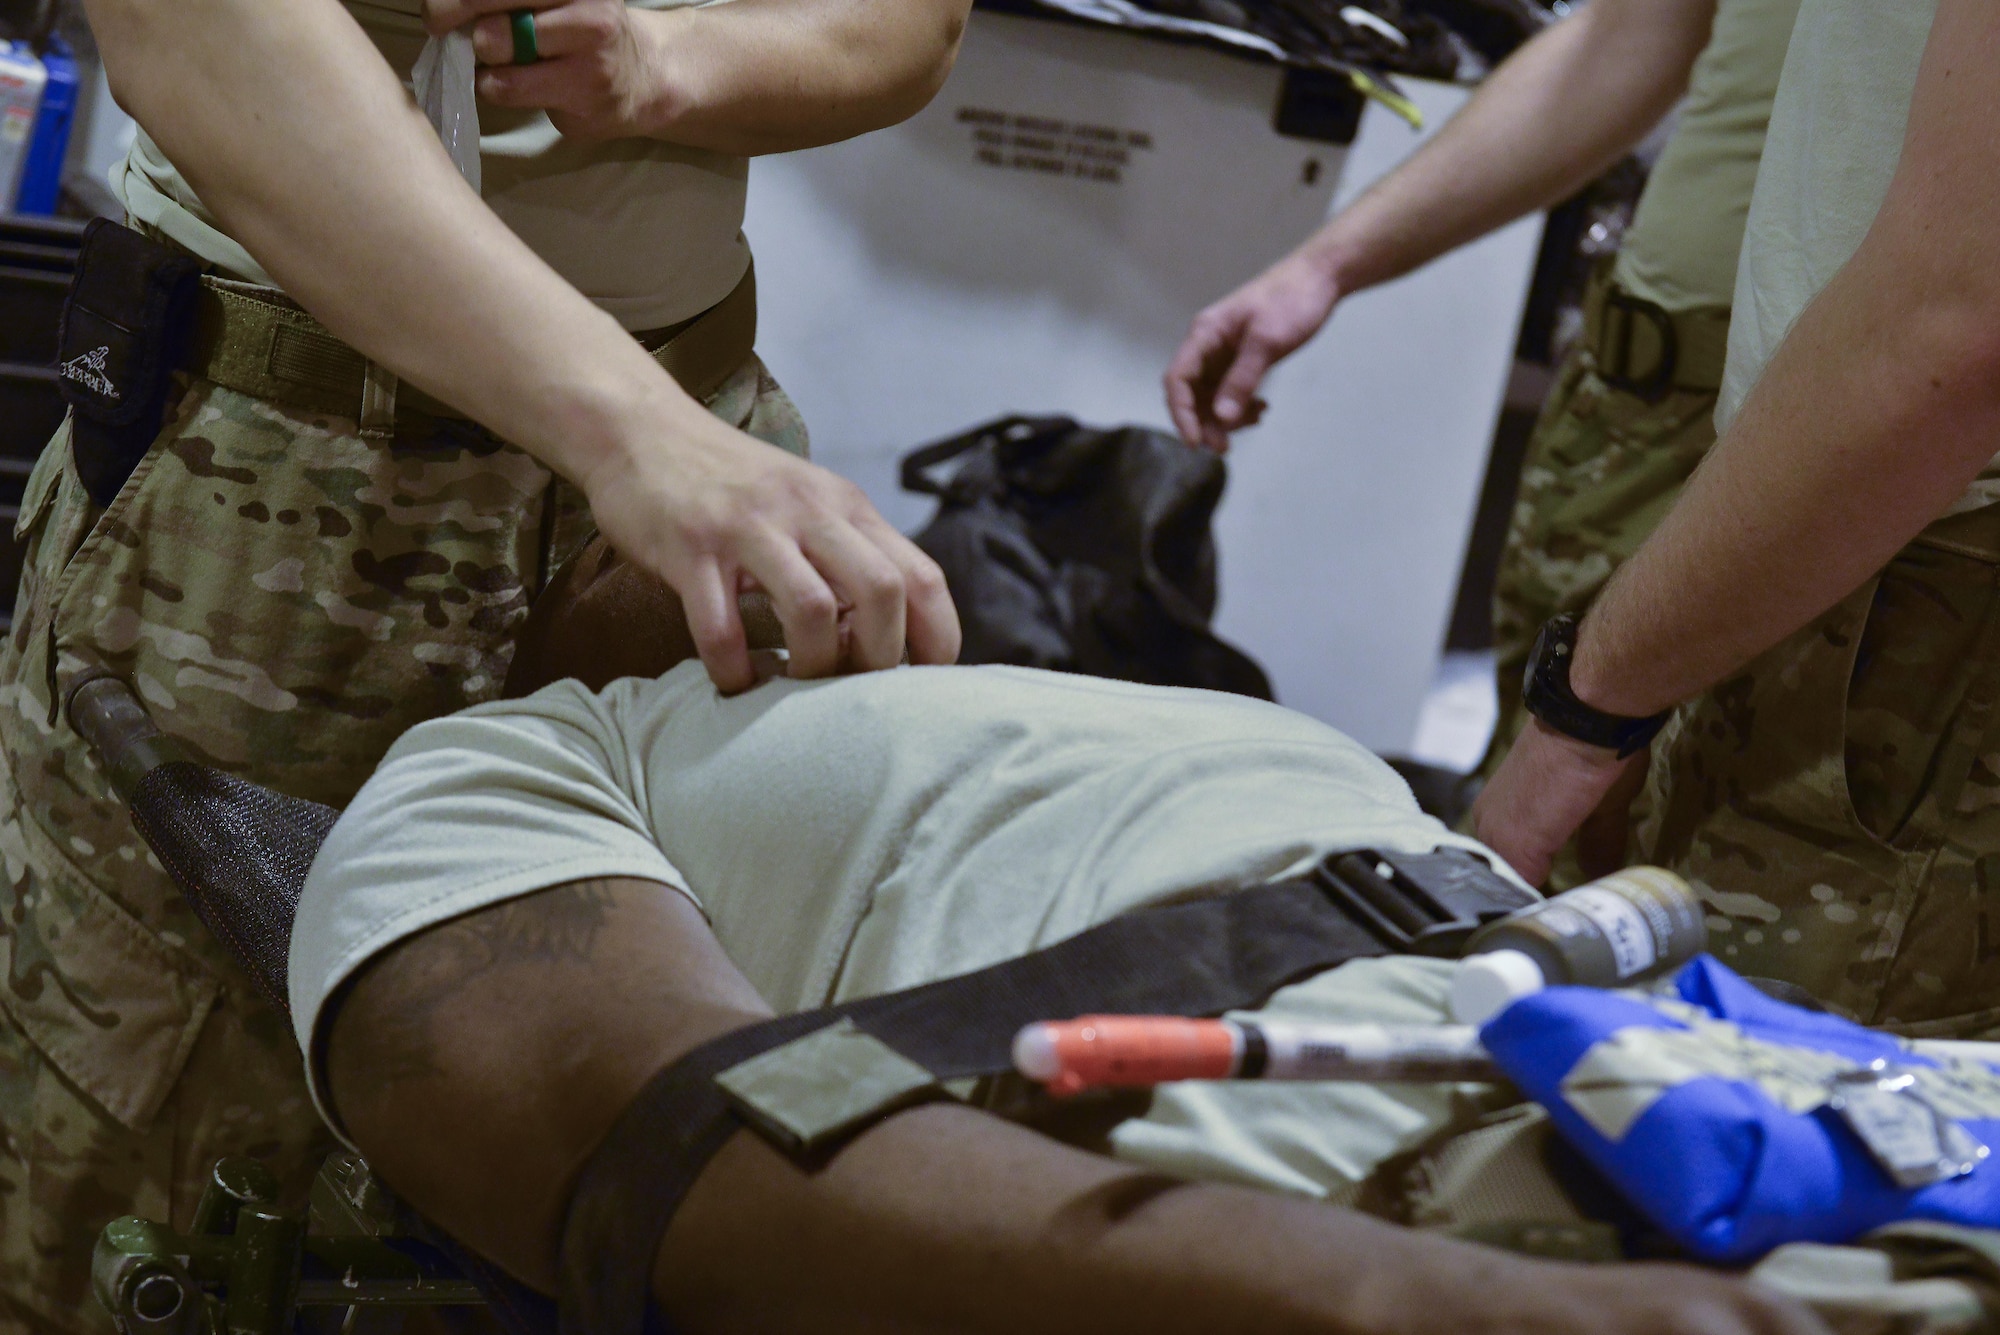 Airmen part of the 379th Expeditionary Medical Group Mobile Field Surgical Team discuss the actions and supplies needed during a timed training scenario to help with familiarization training August 28, 2015 at Al Udeid Air Base, Qatar. (U.S. Air Force photo/Staff Sgt. Alexandre Montes)